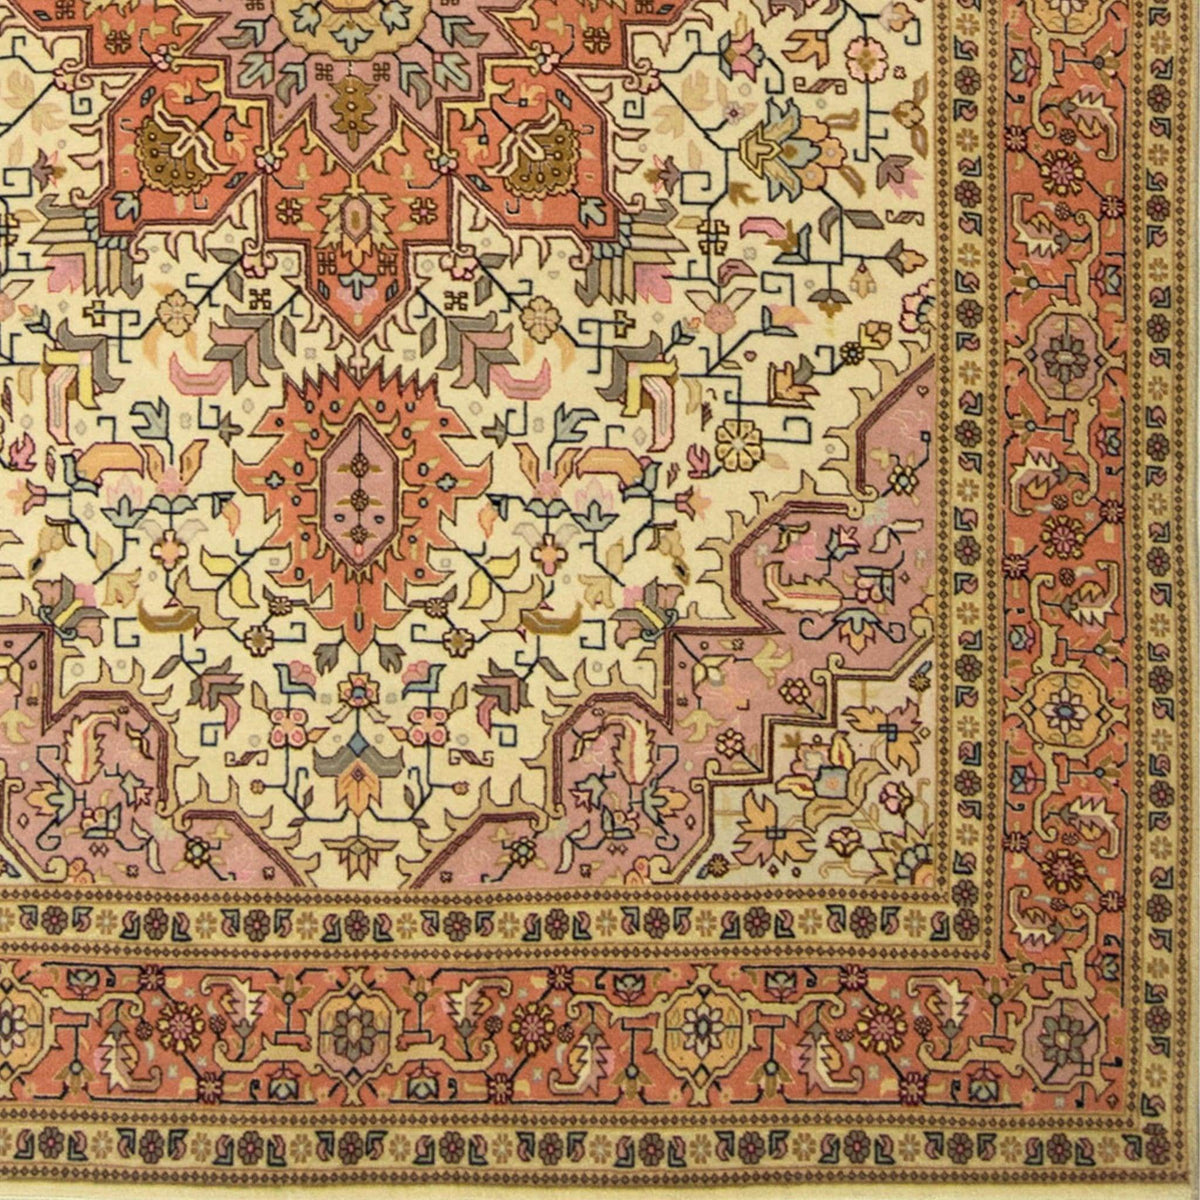 Super Fine Hand-knotted Persian Wool and Silk Tabriz Rug 154cm x 209cm